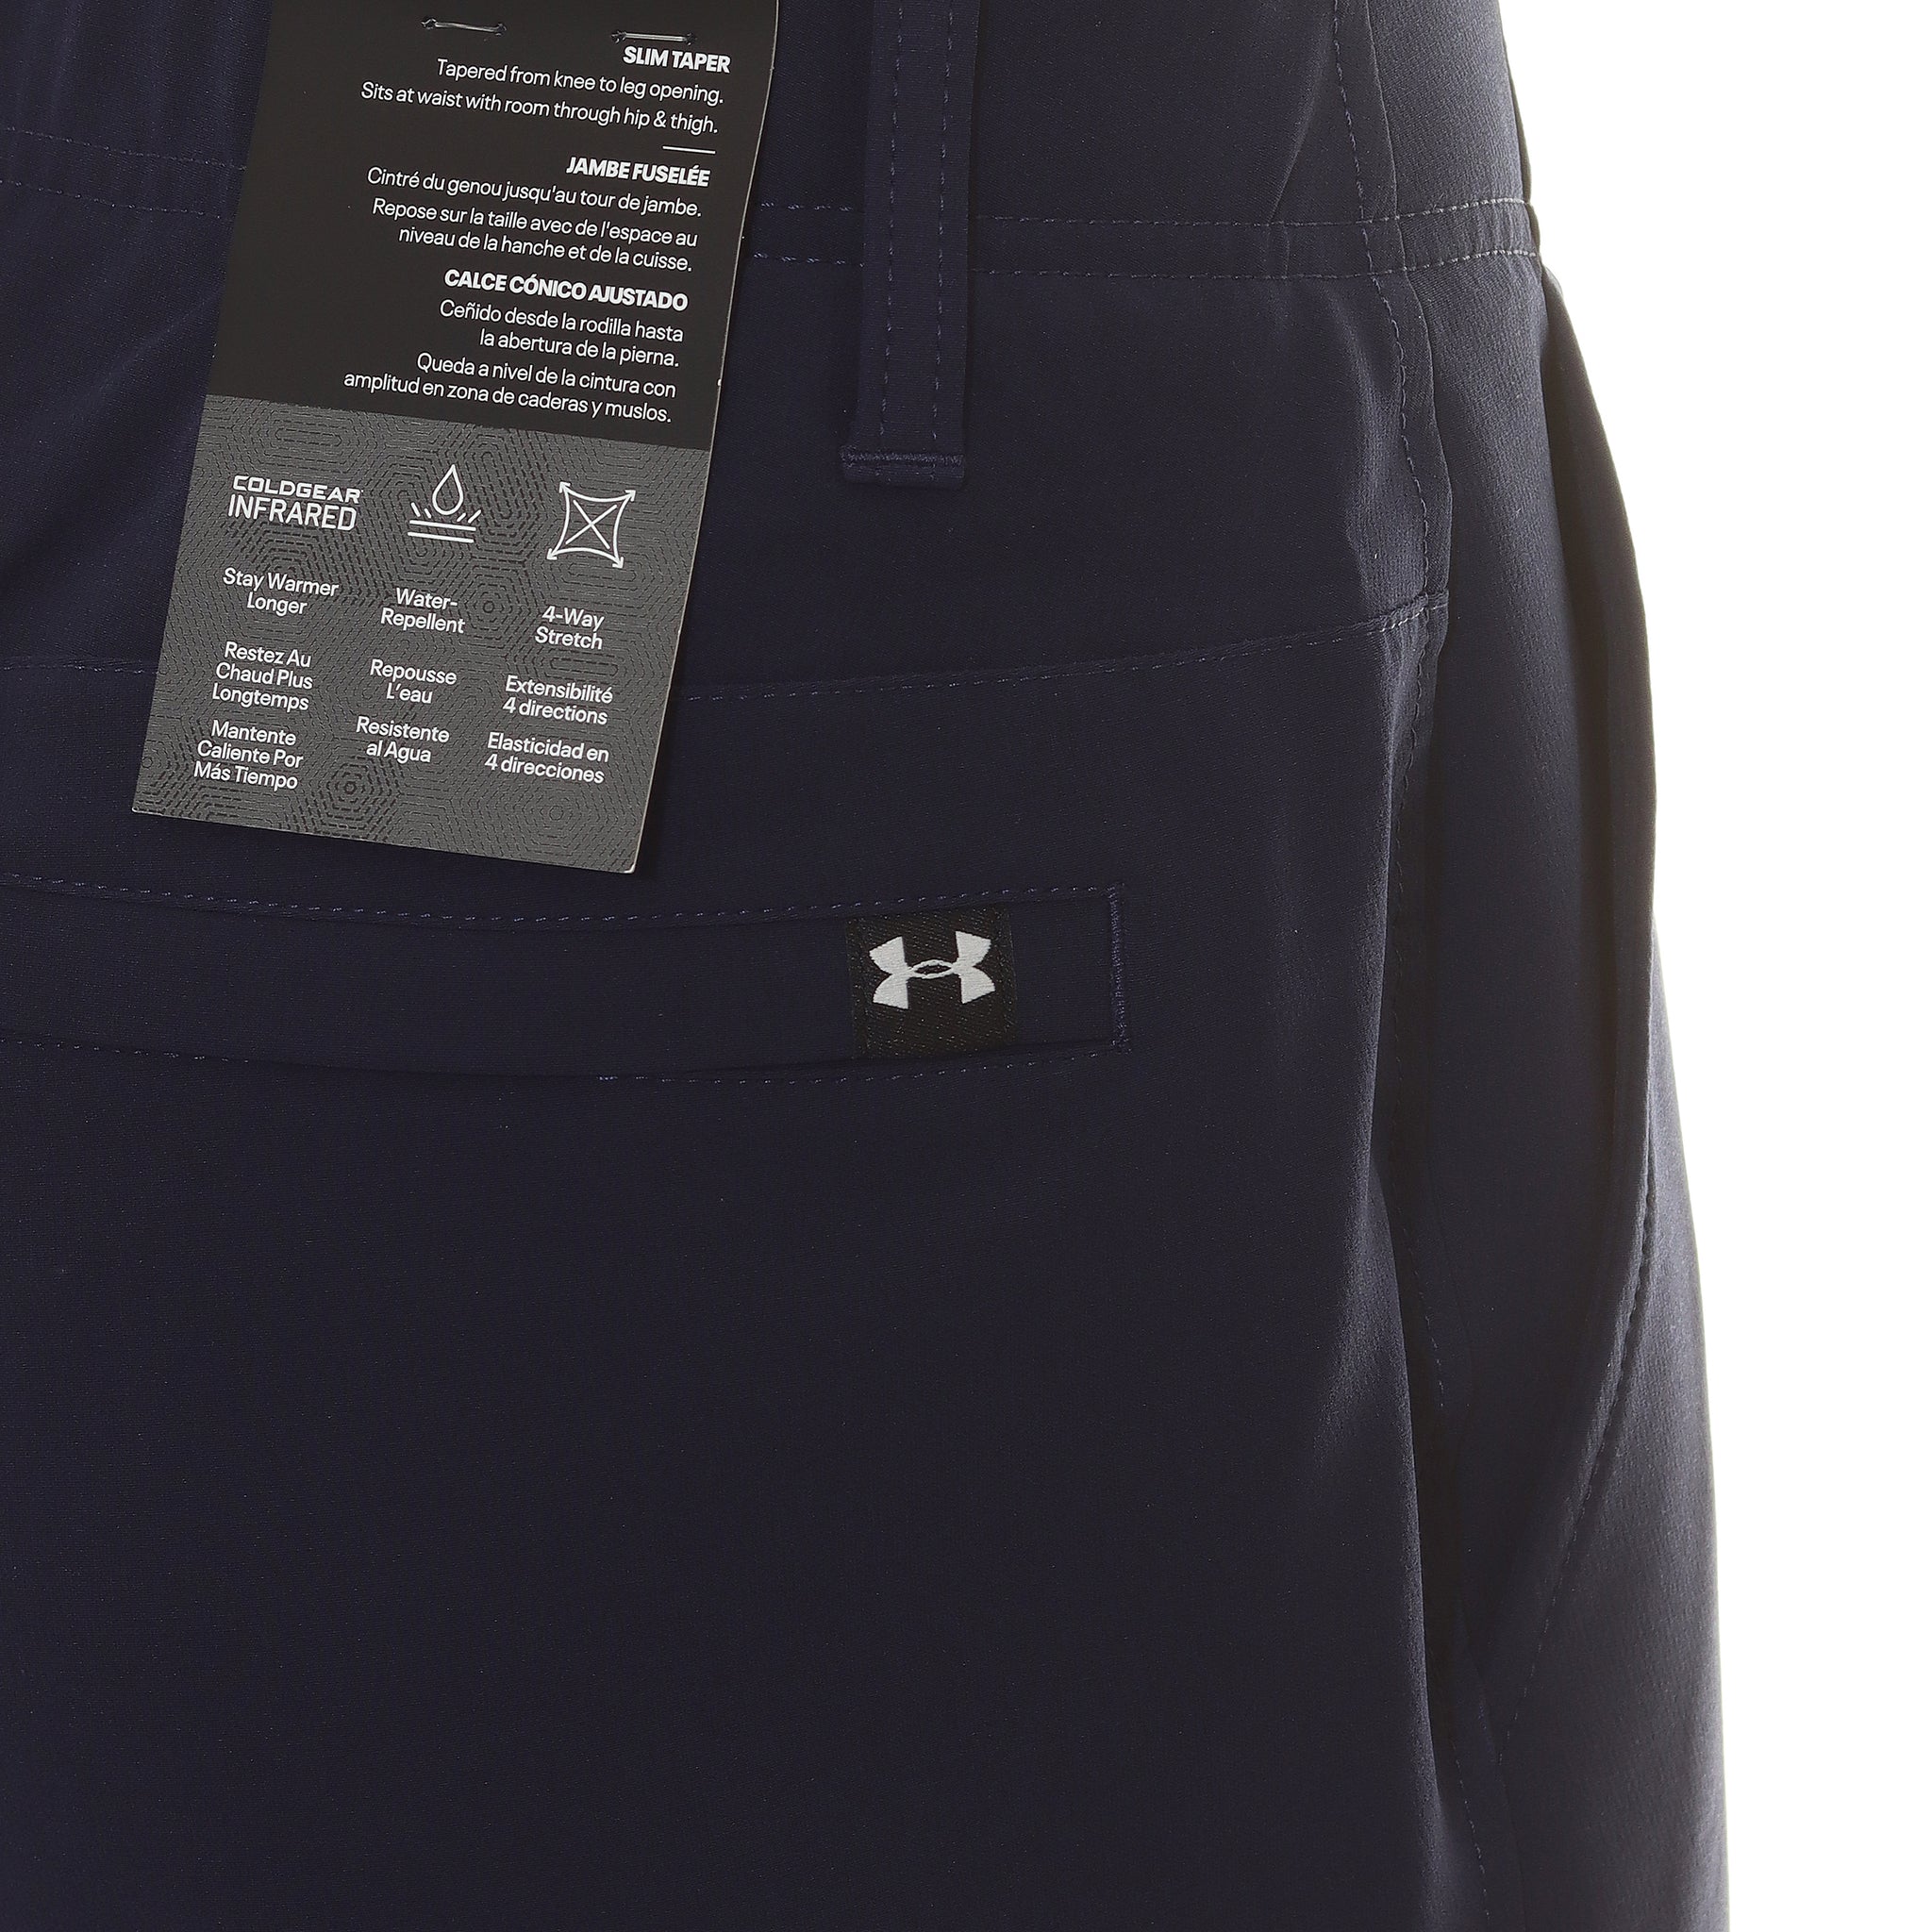 under-armour-golf-cgi-tapered-pants-1379729-410-navy